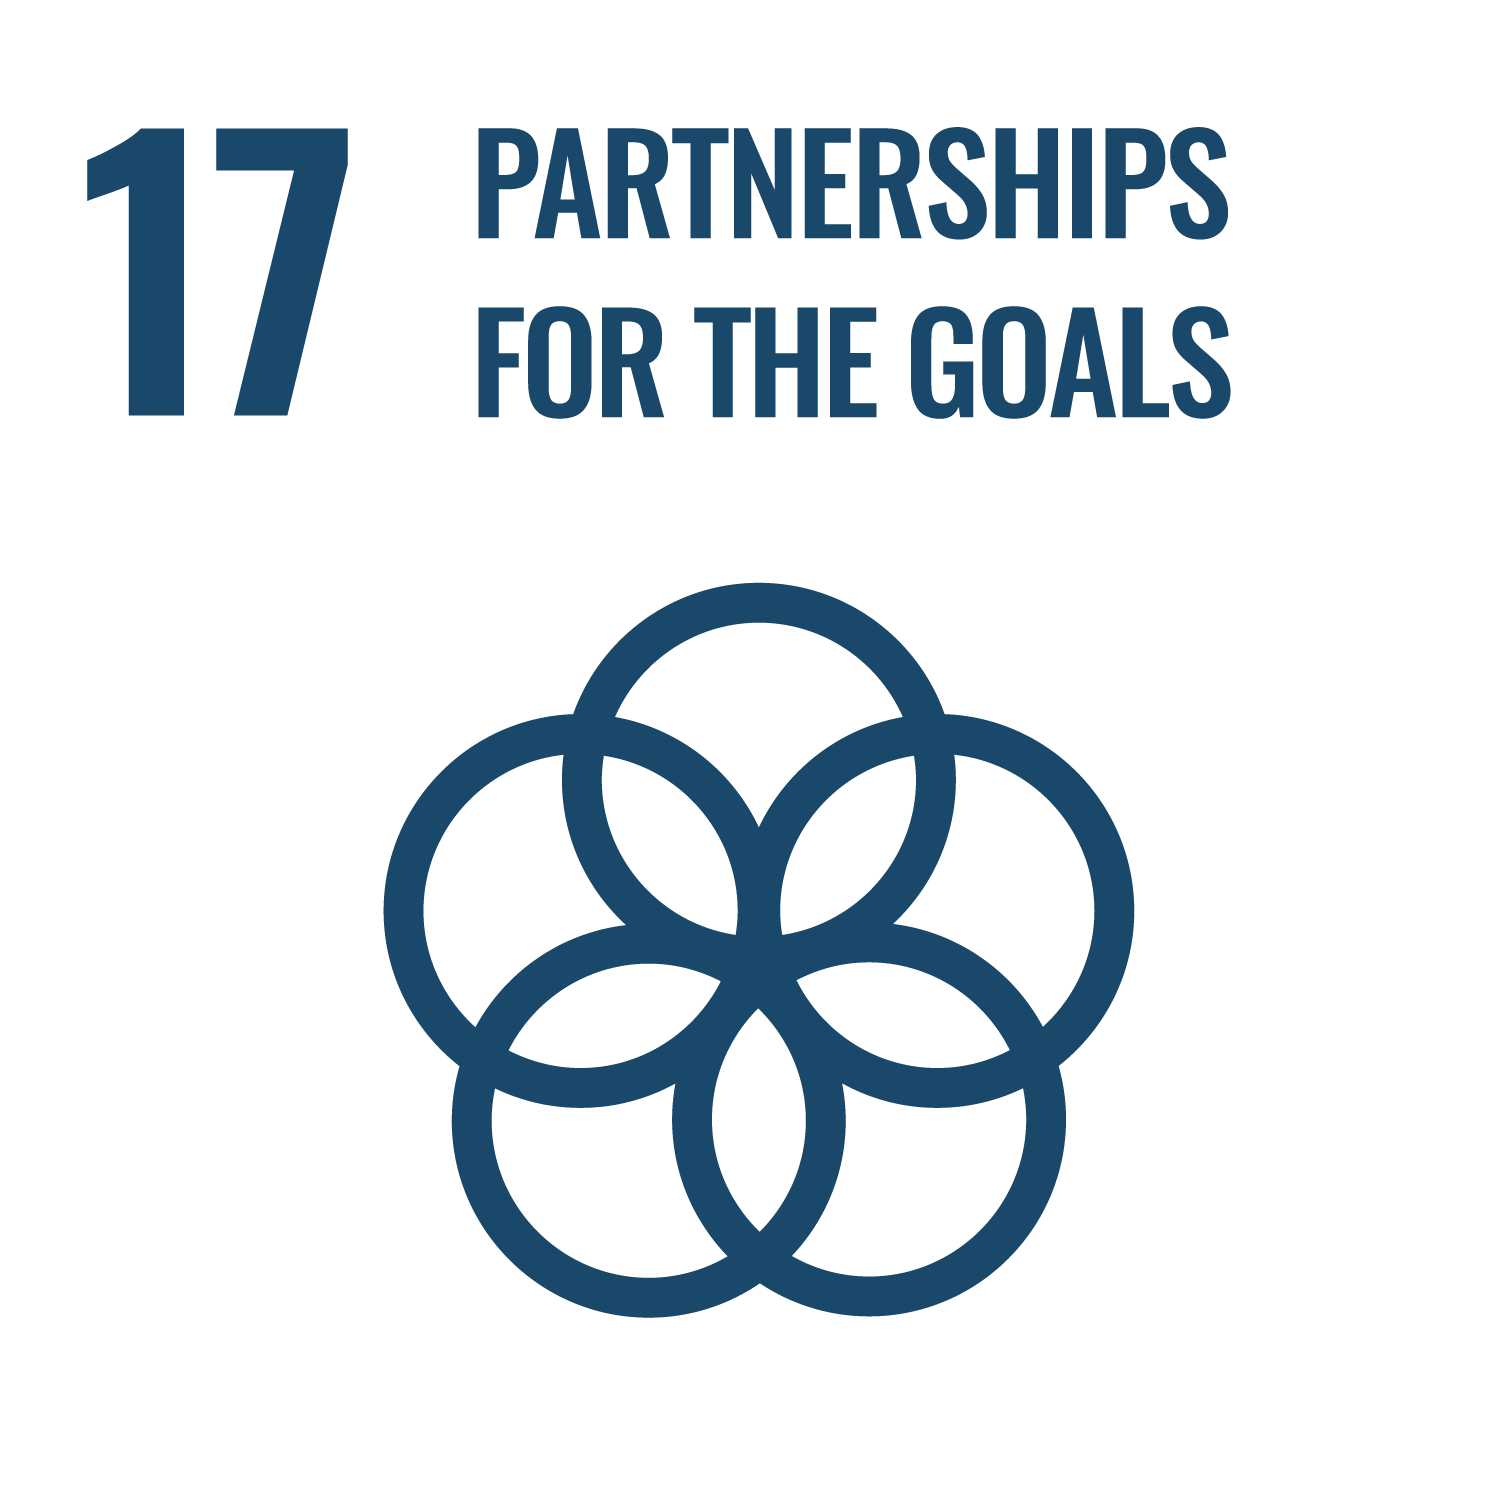 17 - Partnerships for the Goals